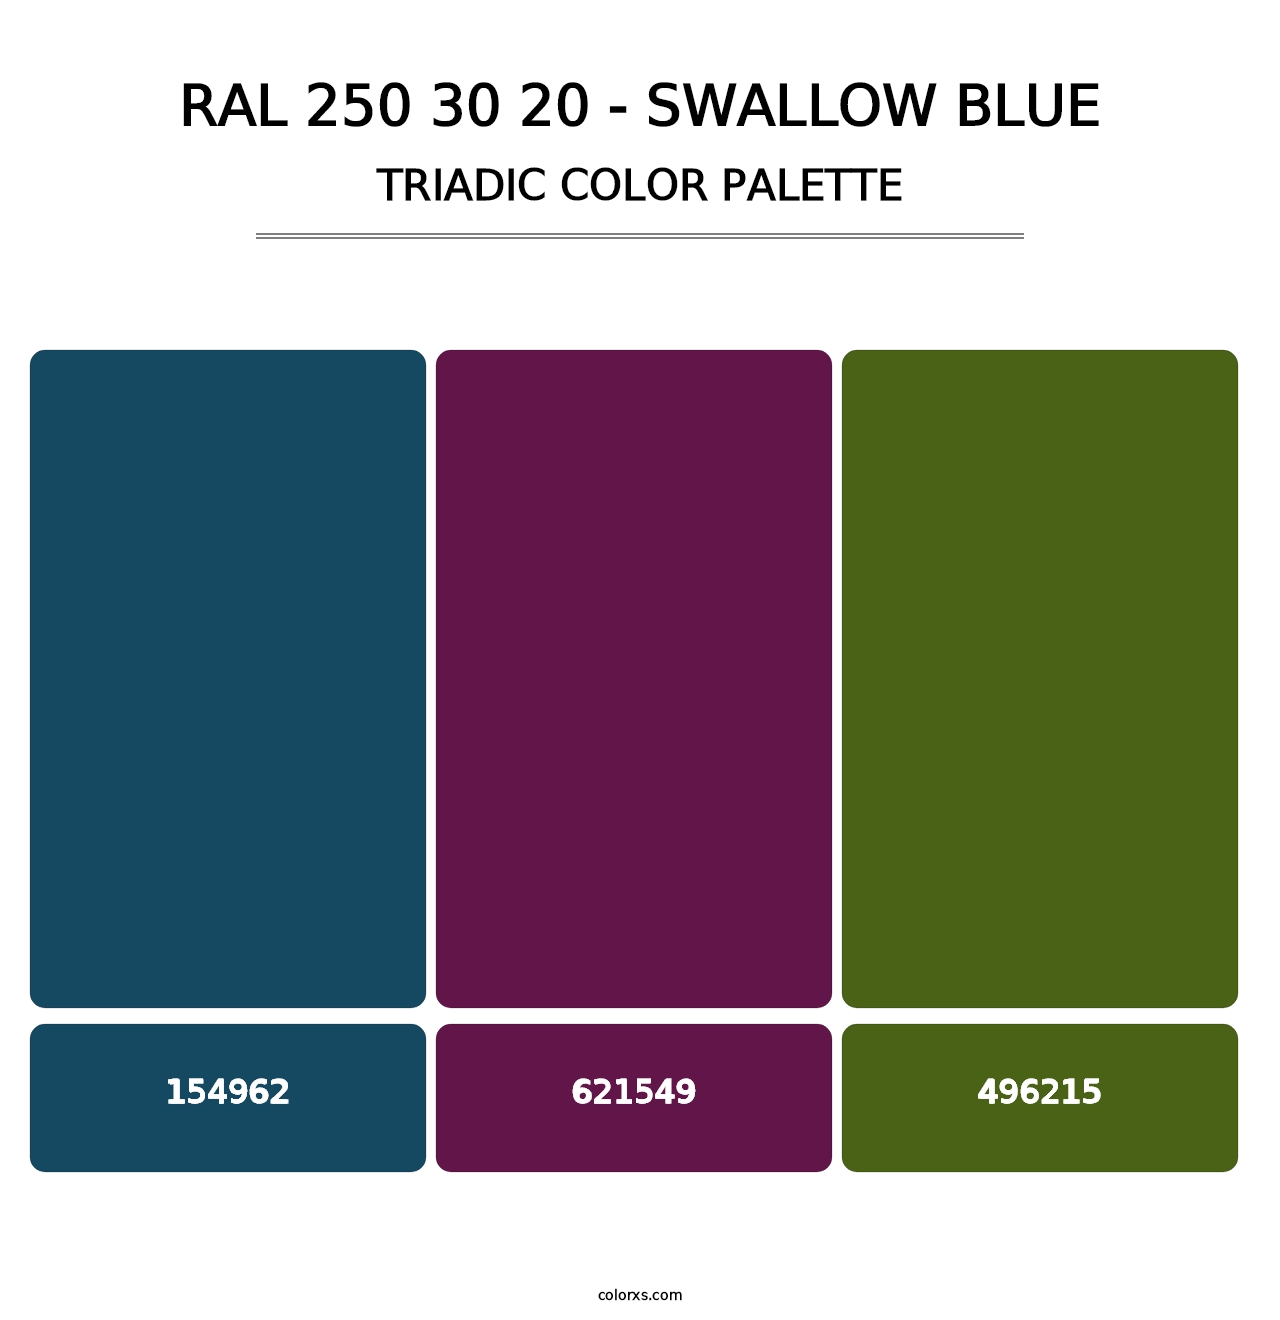 RAL 250 30 20 - Swallow Blue - Triadic Color Palette